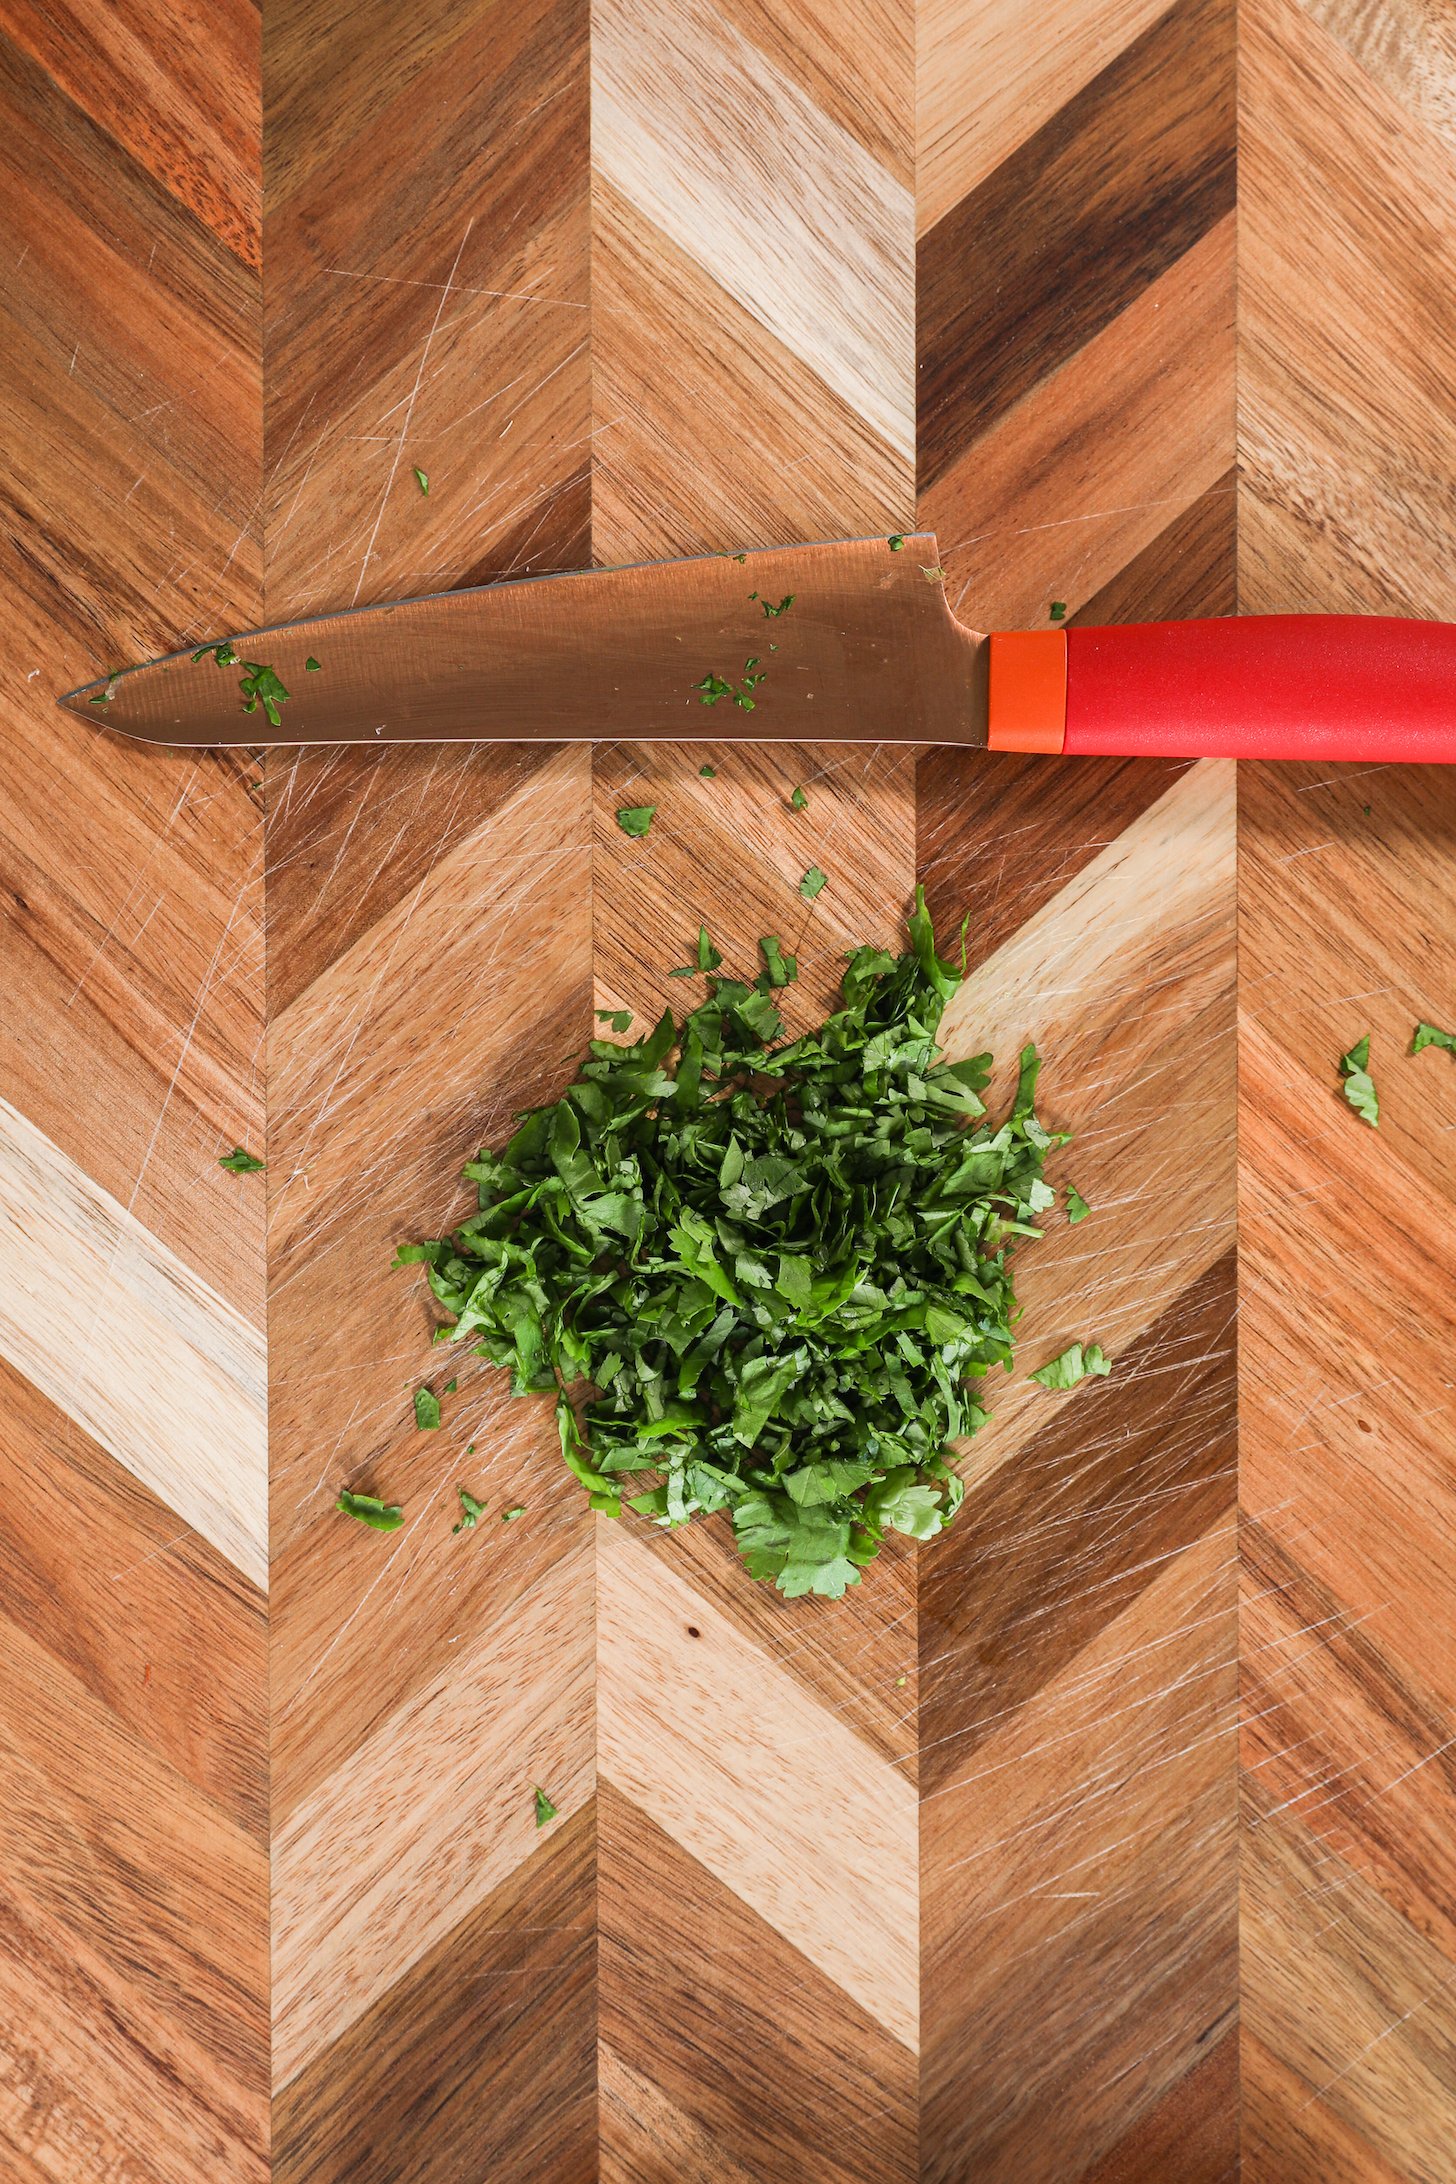 Finely chopped greens and a red knife on a wooden board.